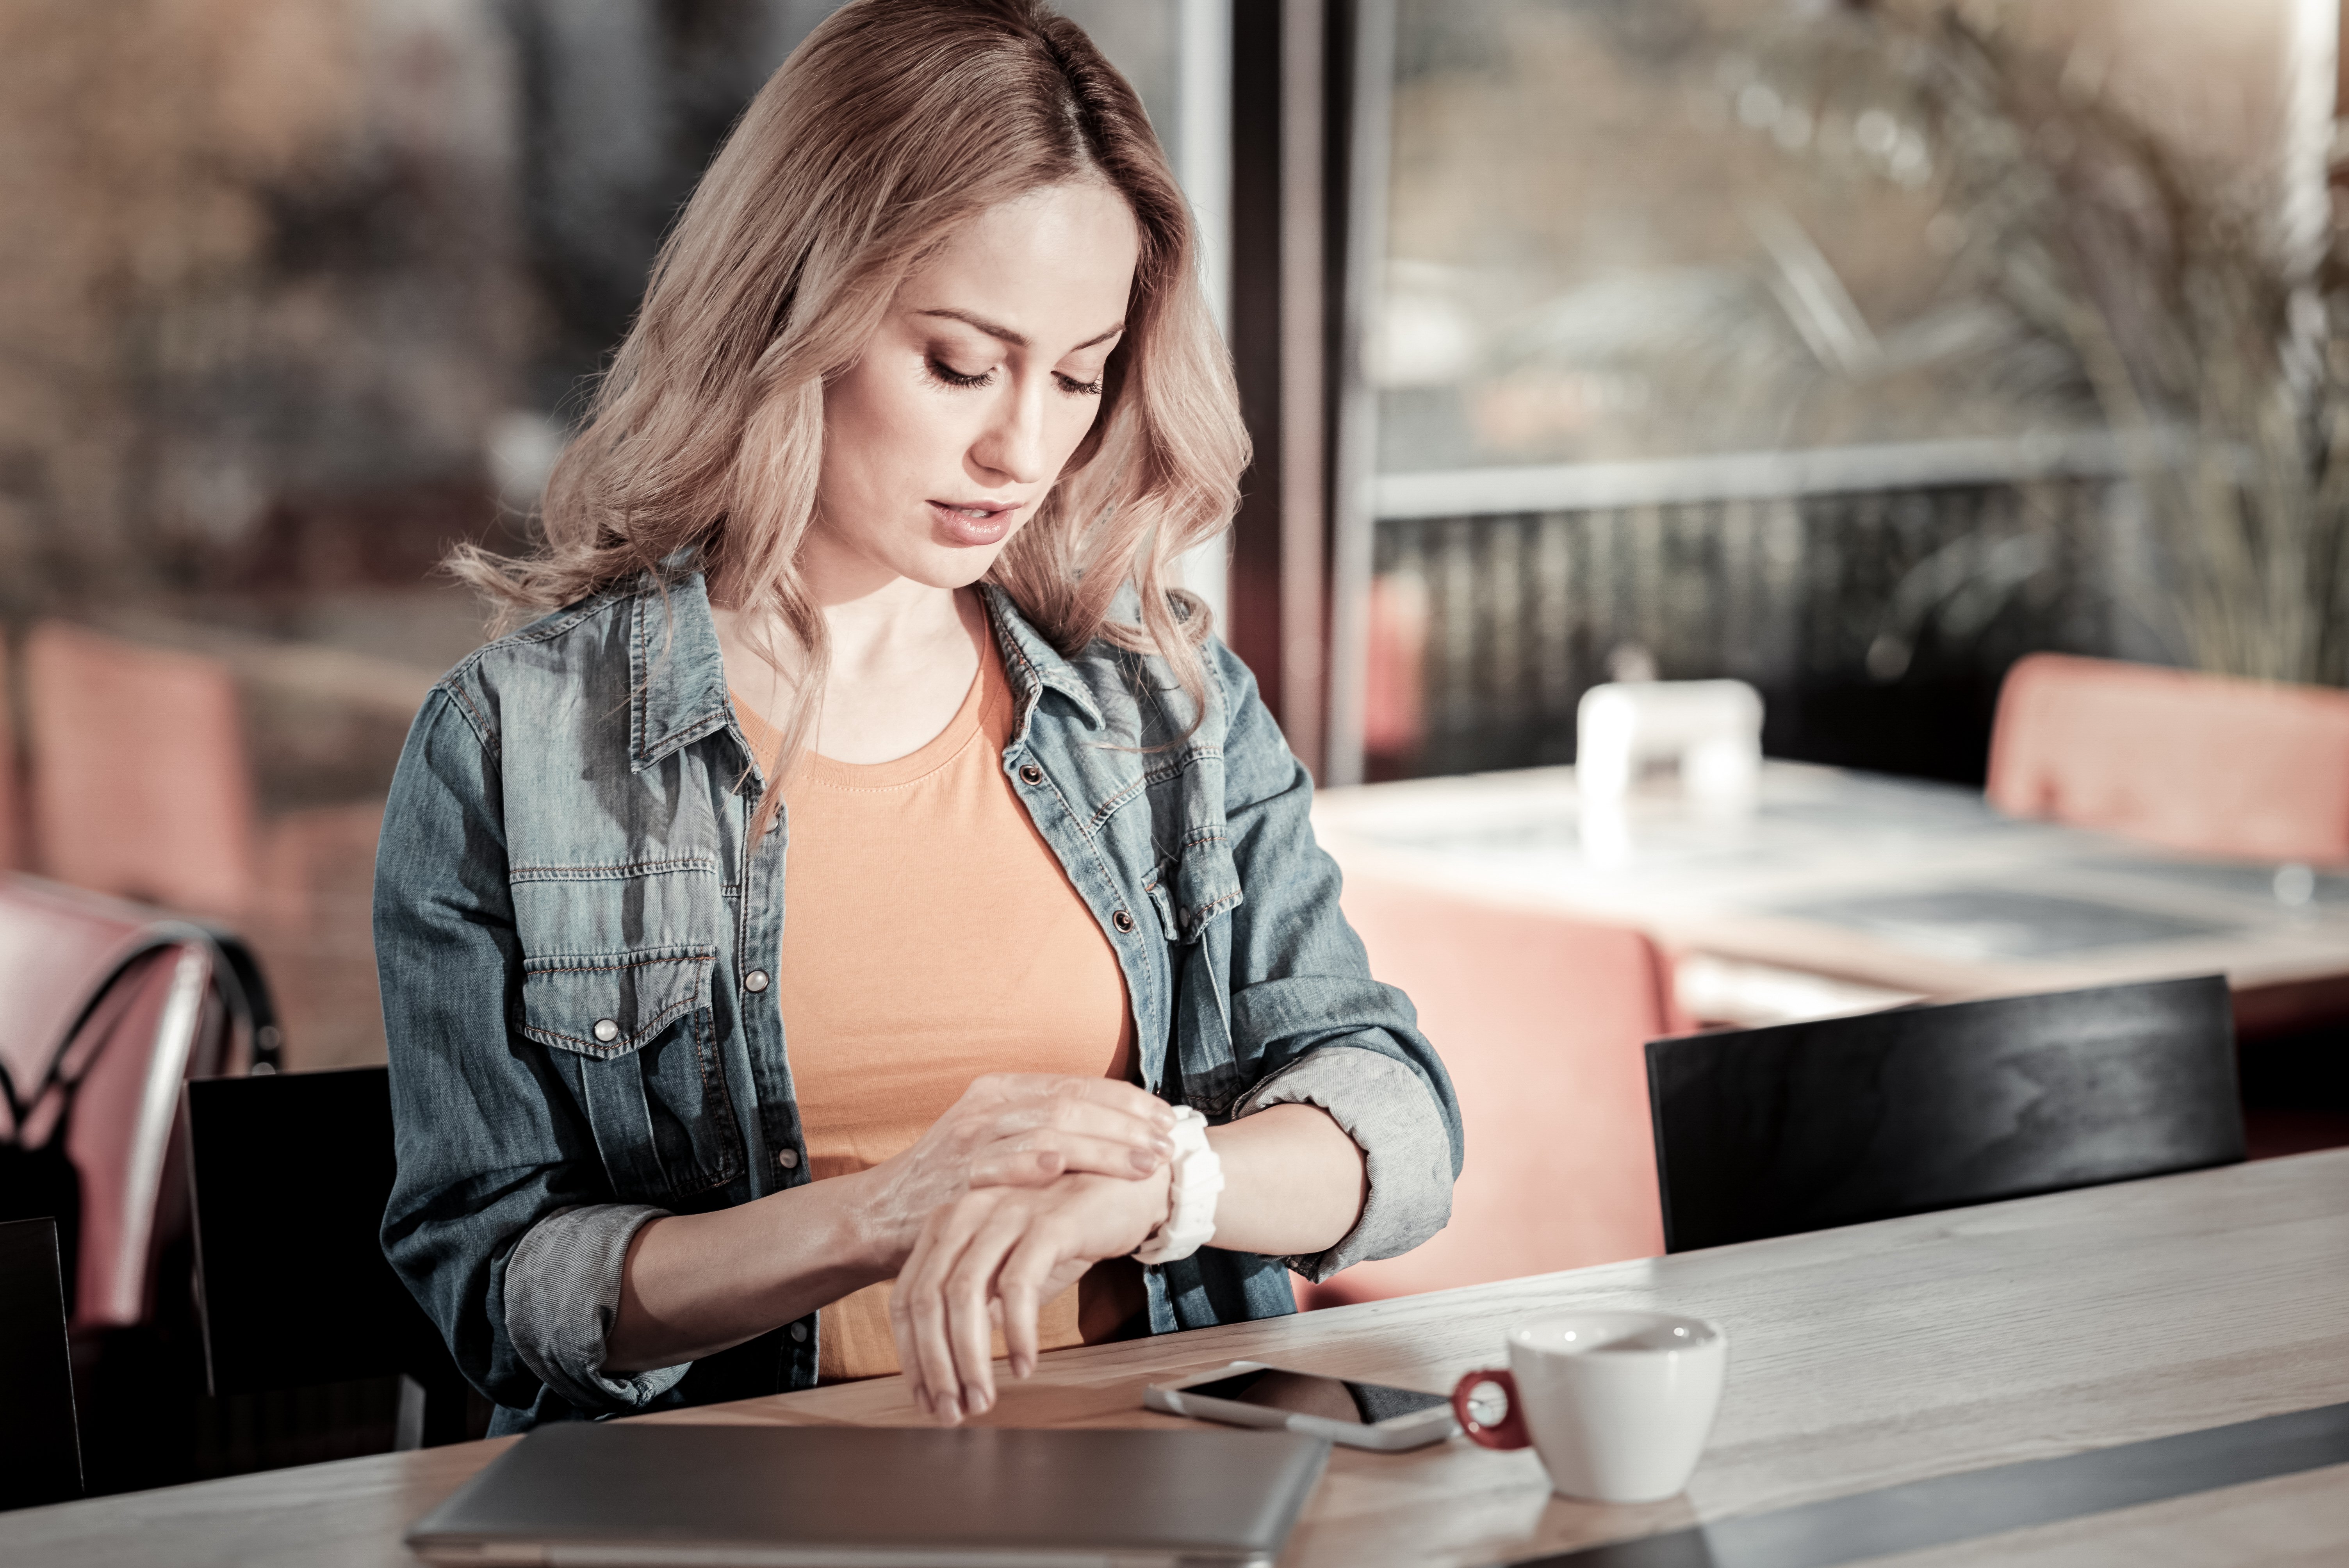 Woman looking at her watch. Image credit: Shutterstock